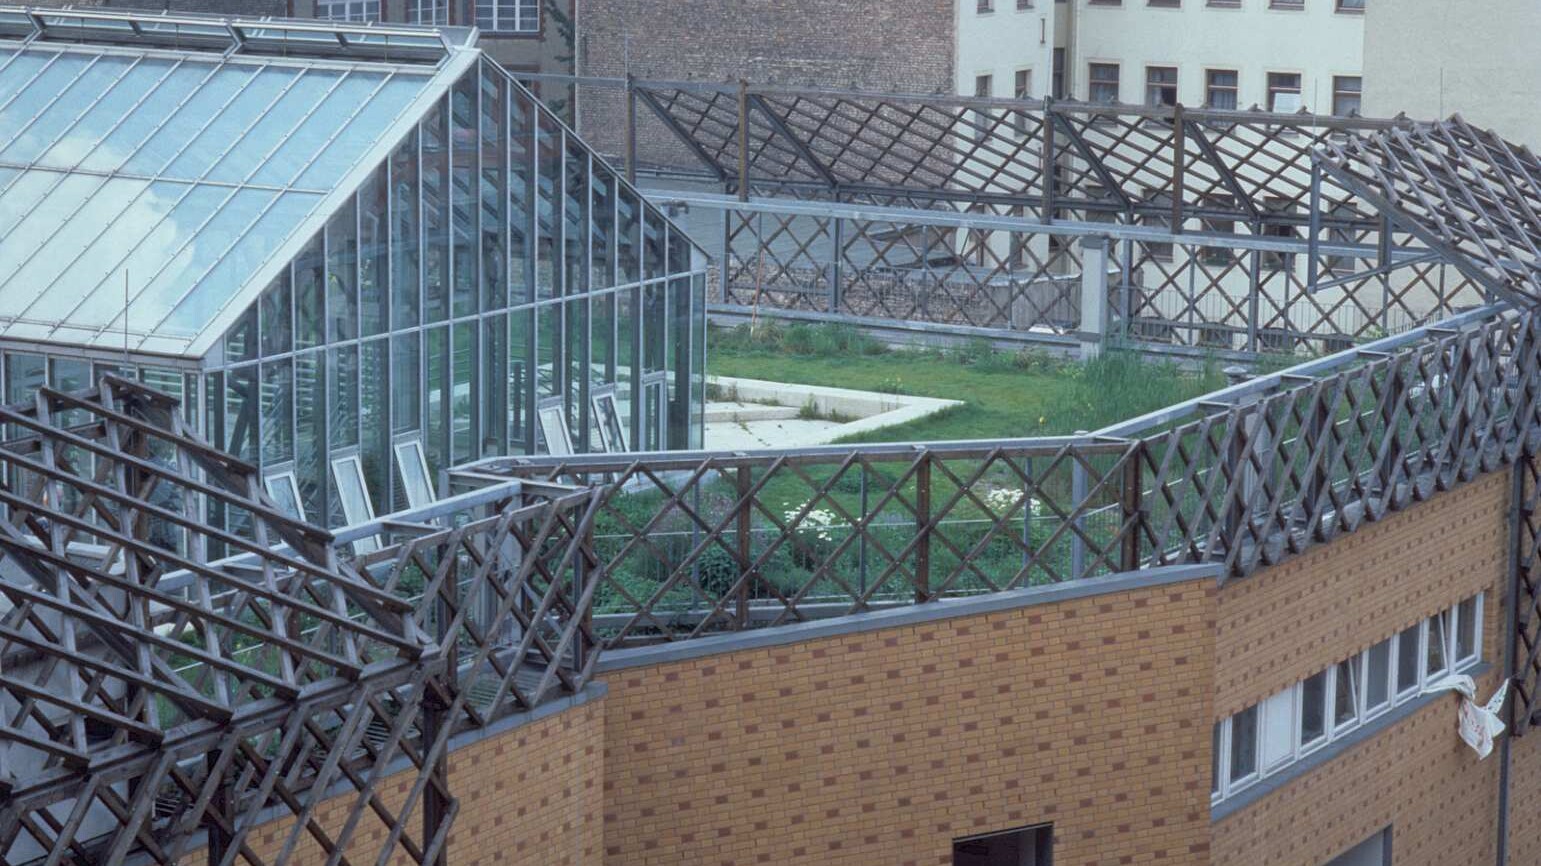 The daycare centre after conversion of the car park, with a rooftop garden and the roofed courtyard, 1987 © FHXB Friedrichshain-Kreuzberg Museum, Lizenz RR-F